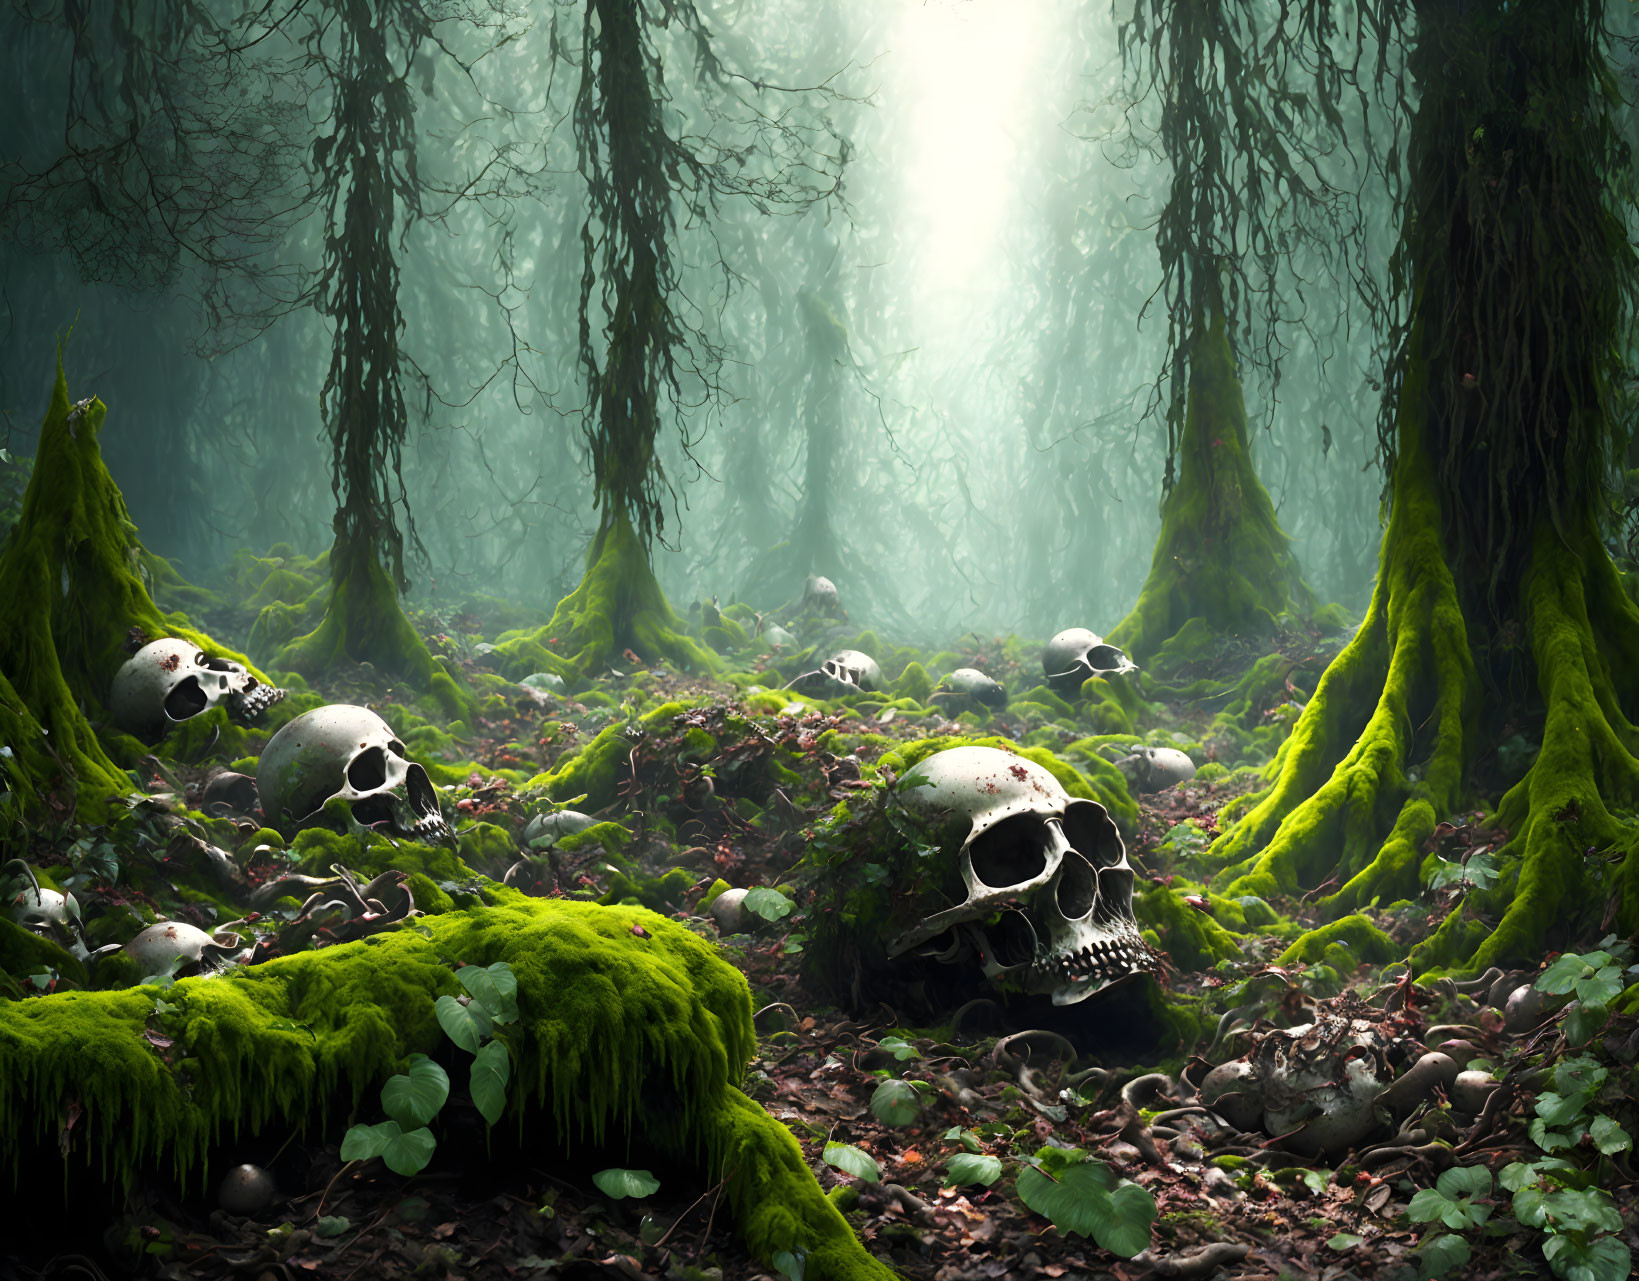 Mystical forest with sunlight, moss-covered ground, human skulls, and eerie fog